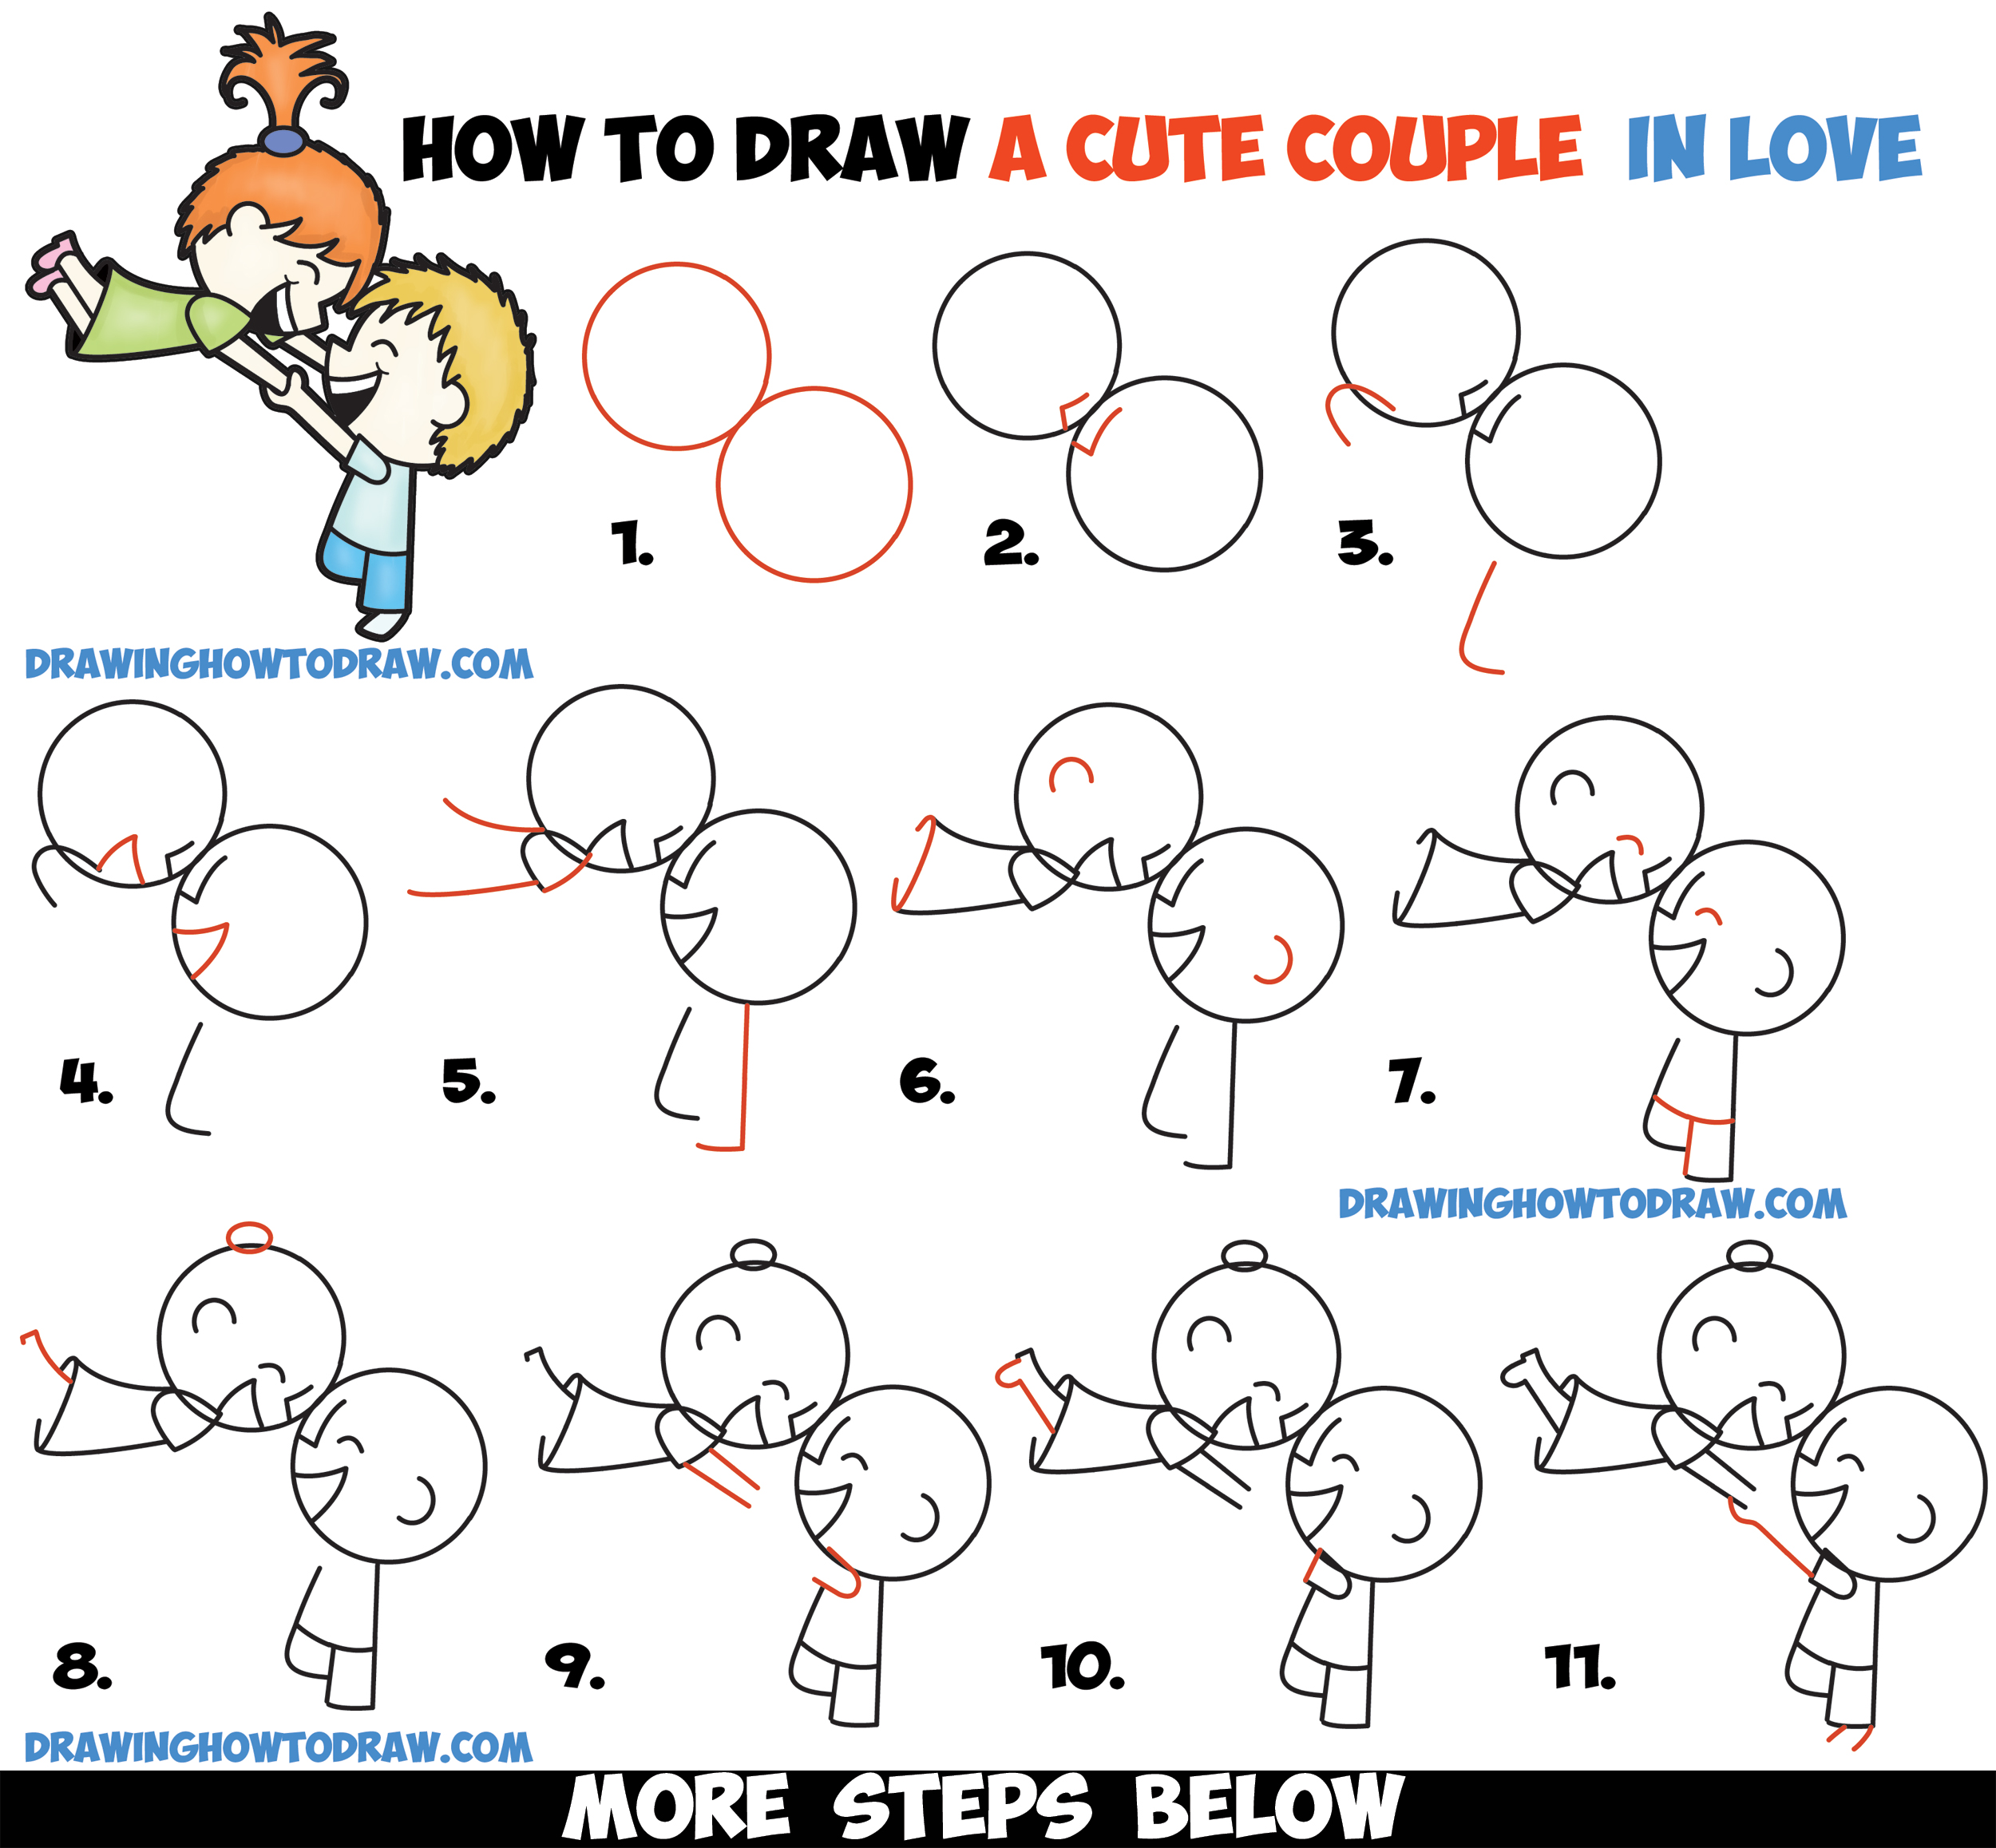 How to Draw a Cute Kawaii Chibi Couple in Love Spinning Each Other Around for Valentine's Day - Easy Step by Step Drawing for Kids